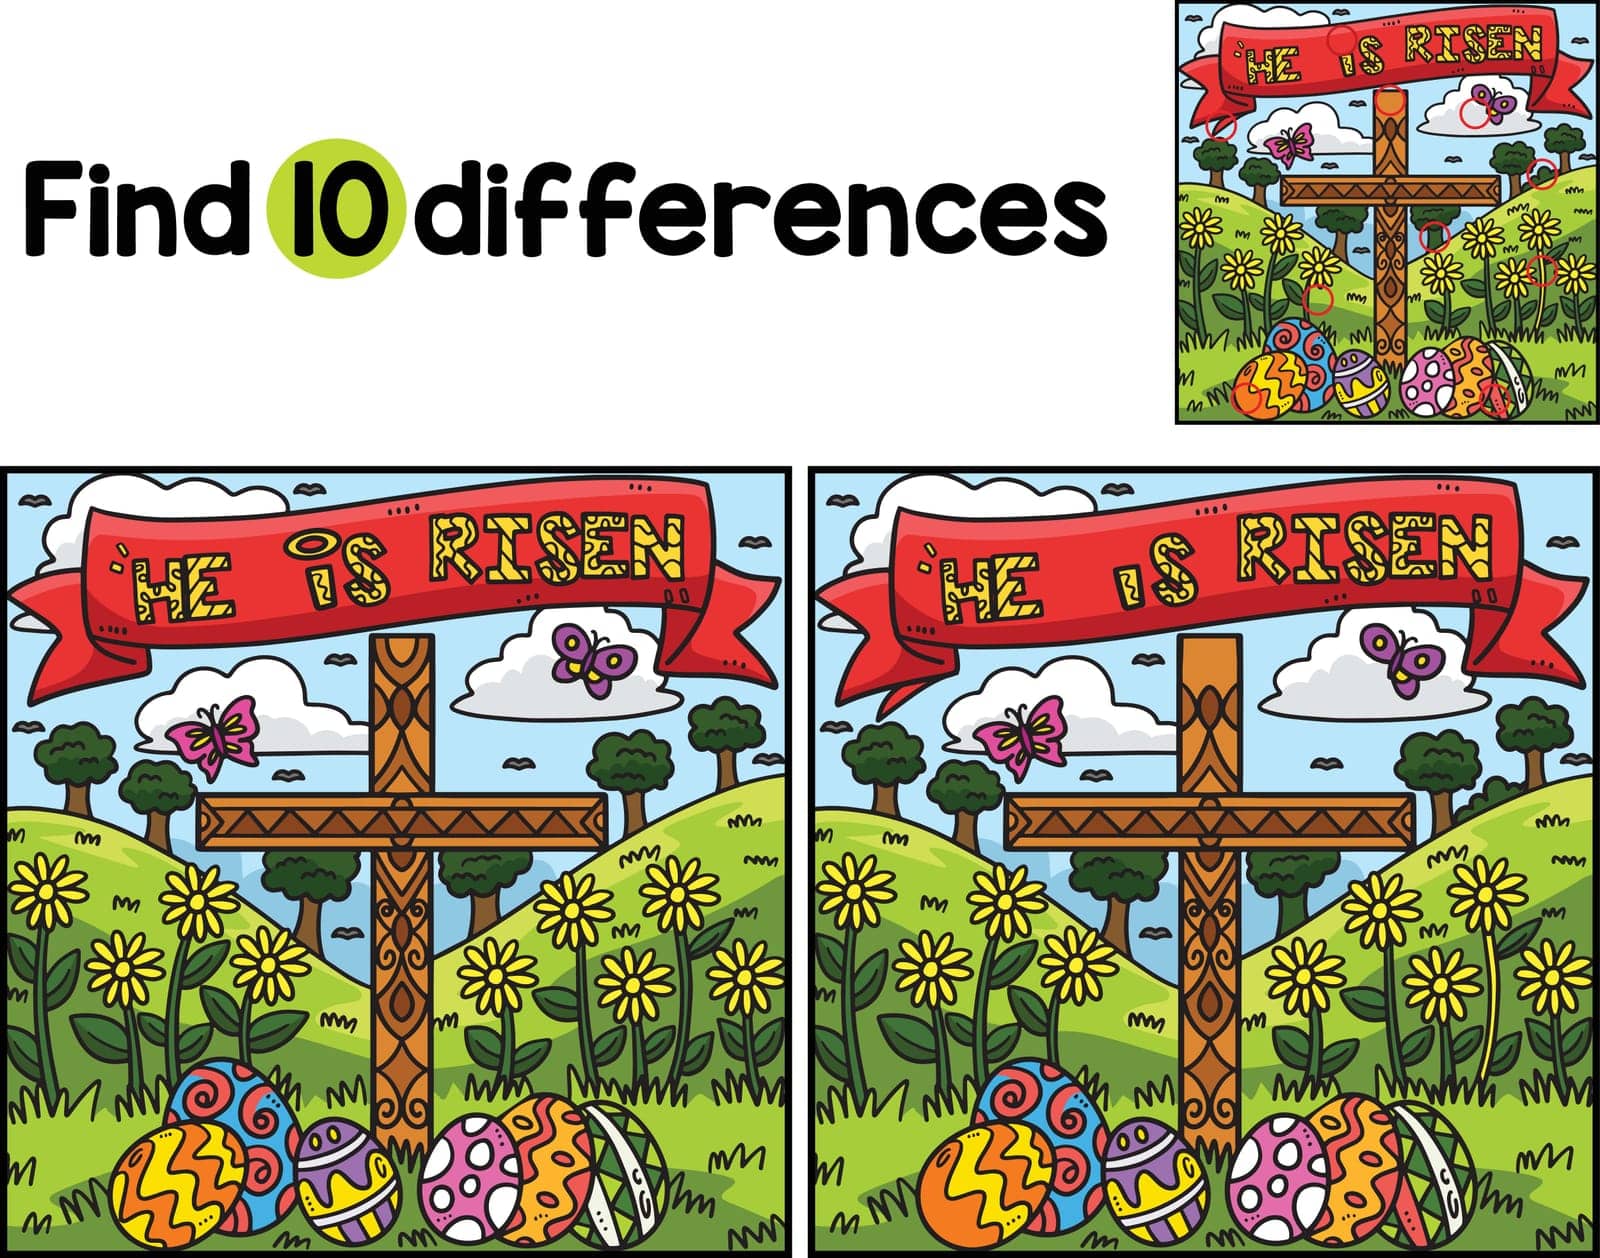 Find or spot the differences on this Christian He Is Risen kids activity page. A funny and educational puzzle-matching game for children.